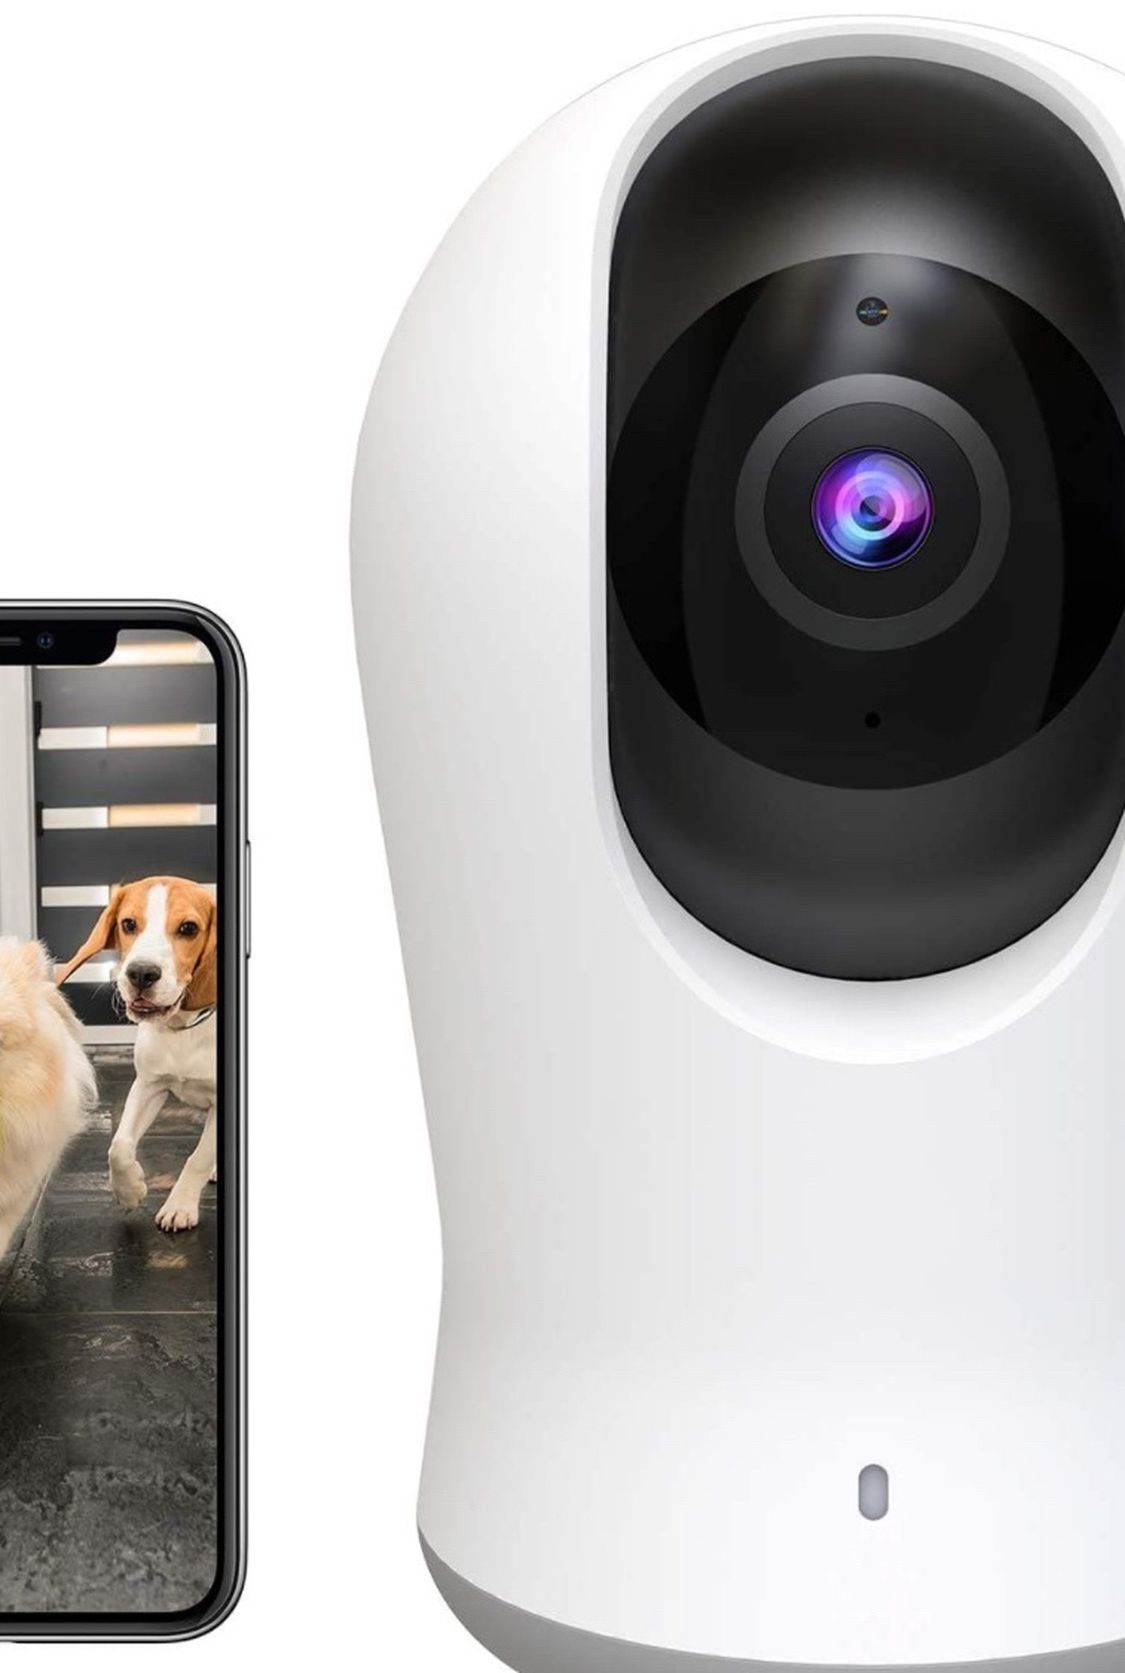 WiFi Camera Indoor with H.265 Coding Technical, 2-Way Audio, AI Human Detection, Enhanced Night Vision in Invisible Infrared, Compatible with Alexa